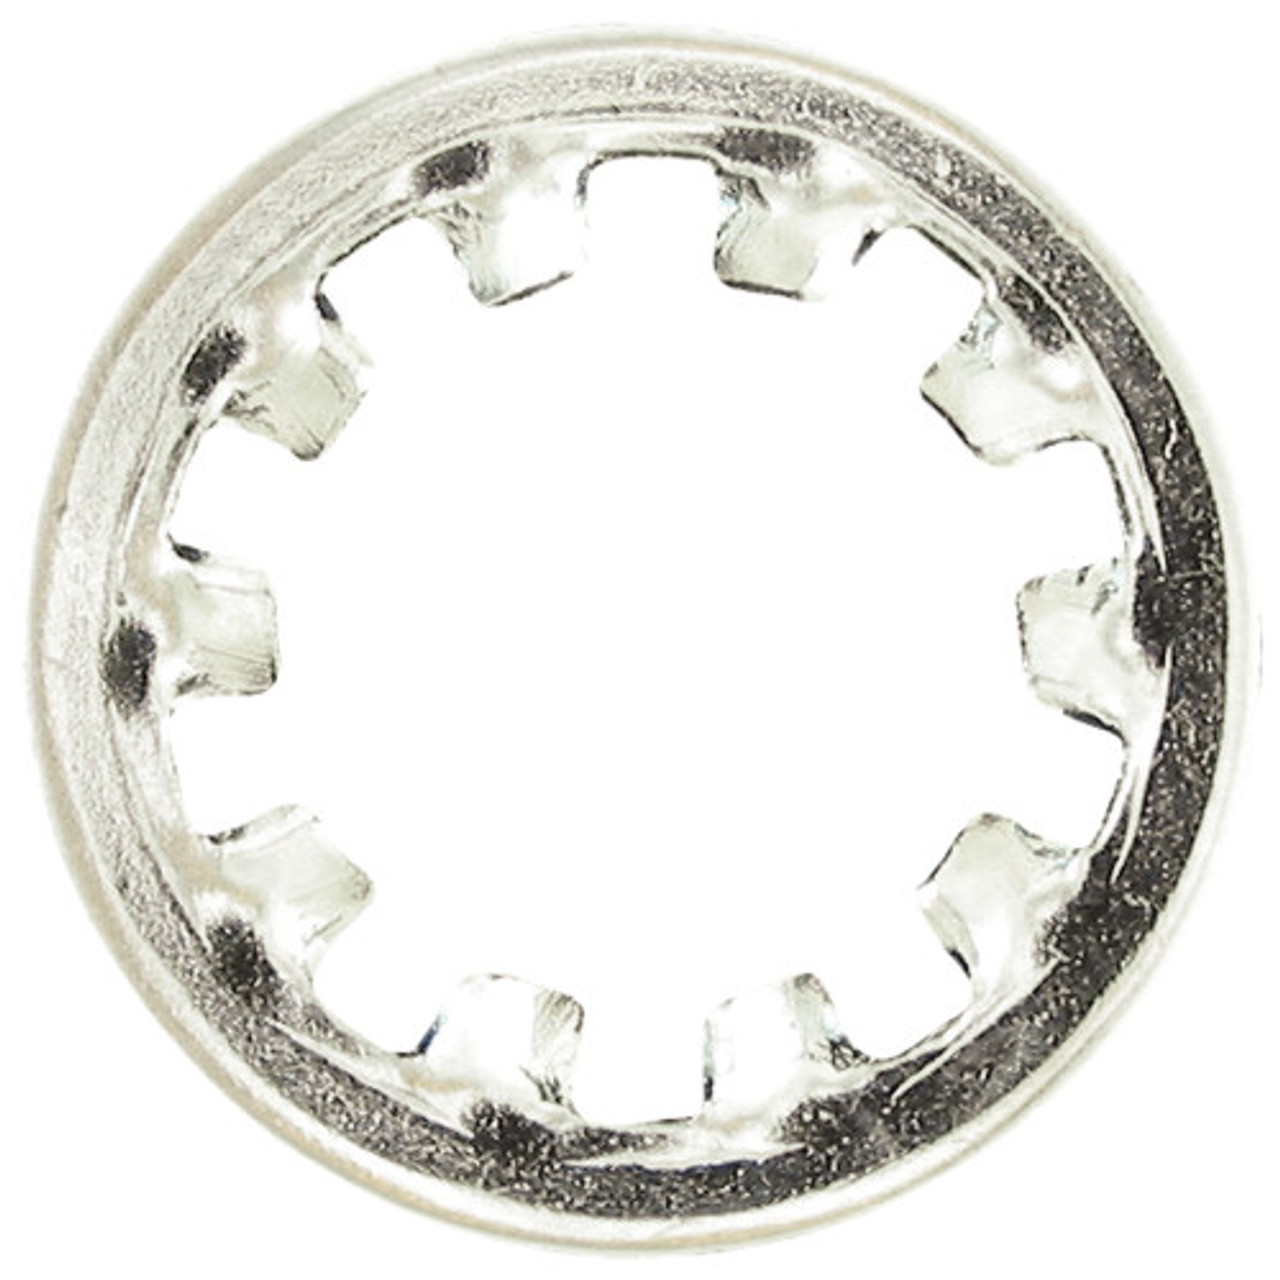 #8 410 Stainless Steel Internal Tooth Lock Washer 100 Pc.   5062-208